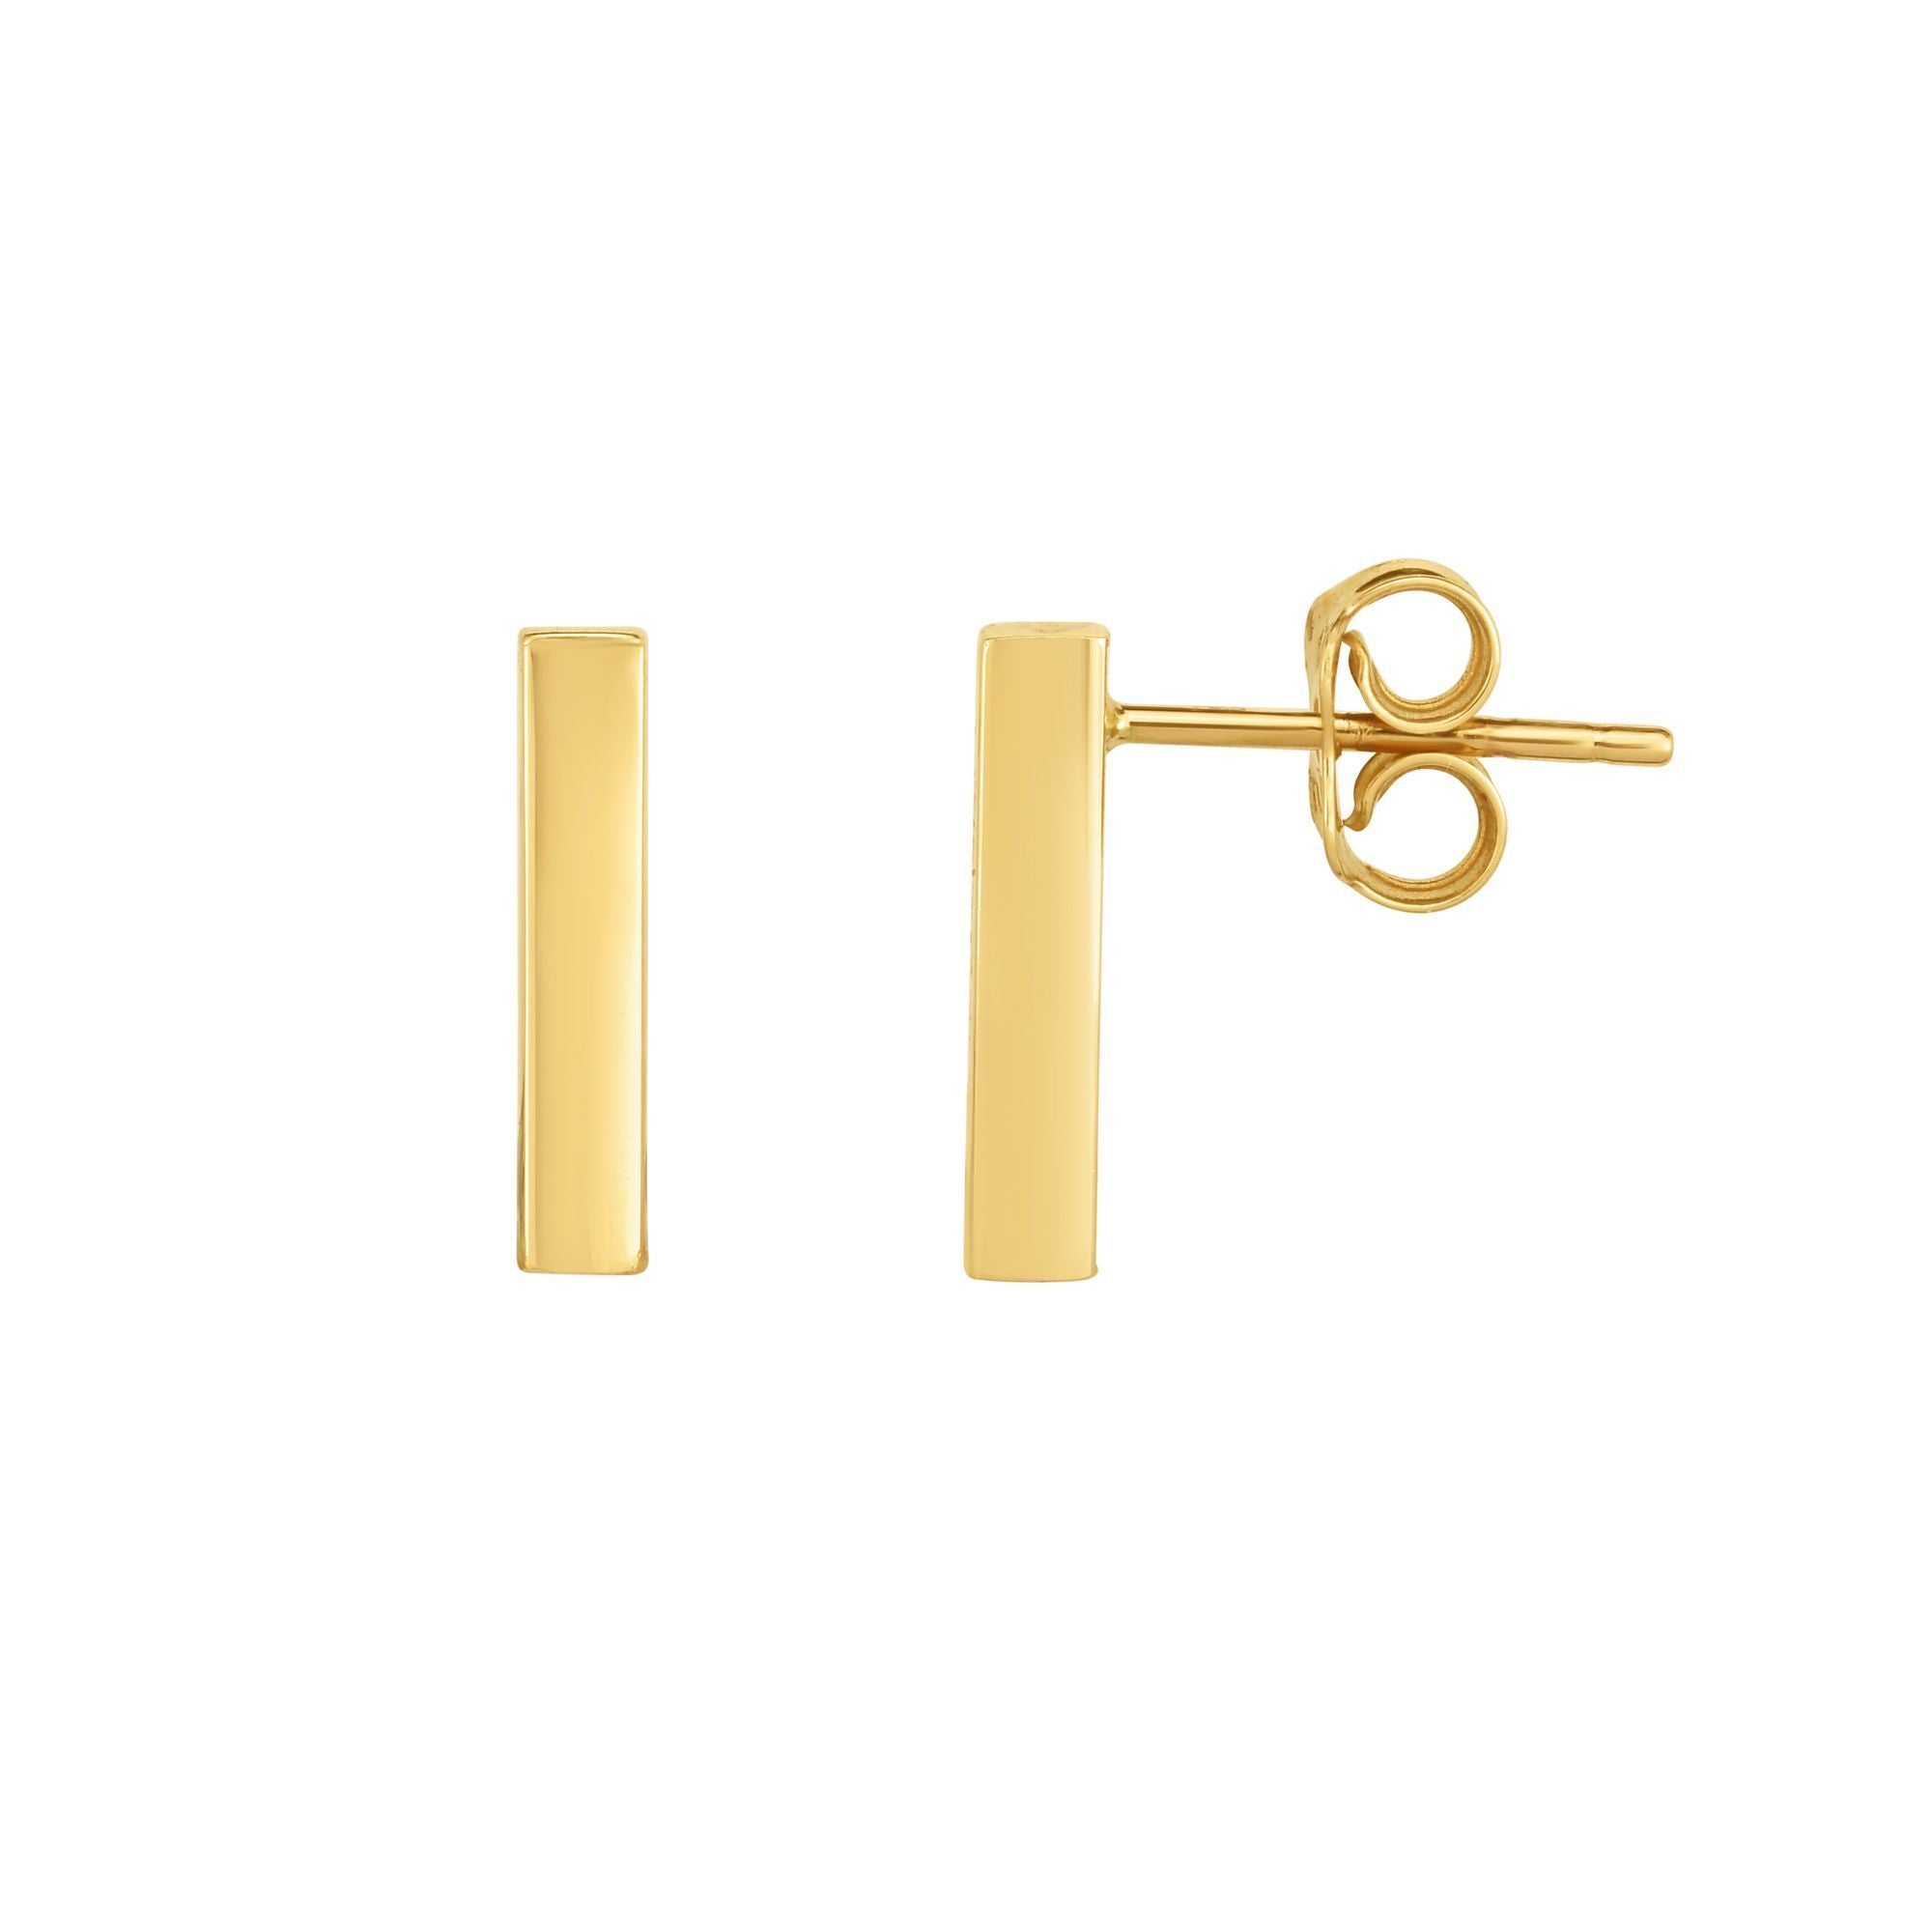 Minimalist Solid Gold Vertical Bar Tube Drop Earrings with Push Back Clasp - wingroupjewelry